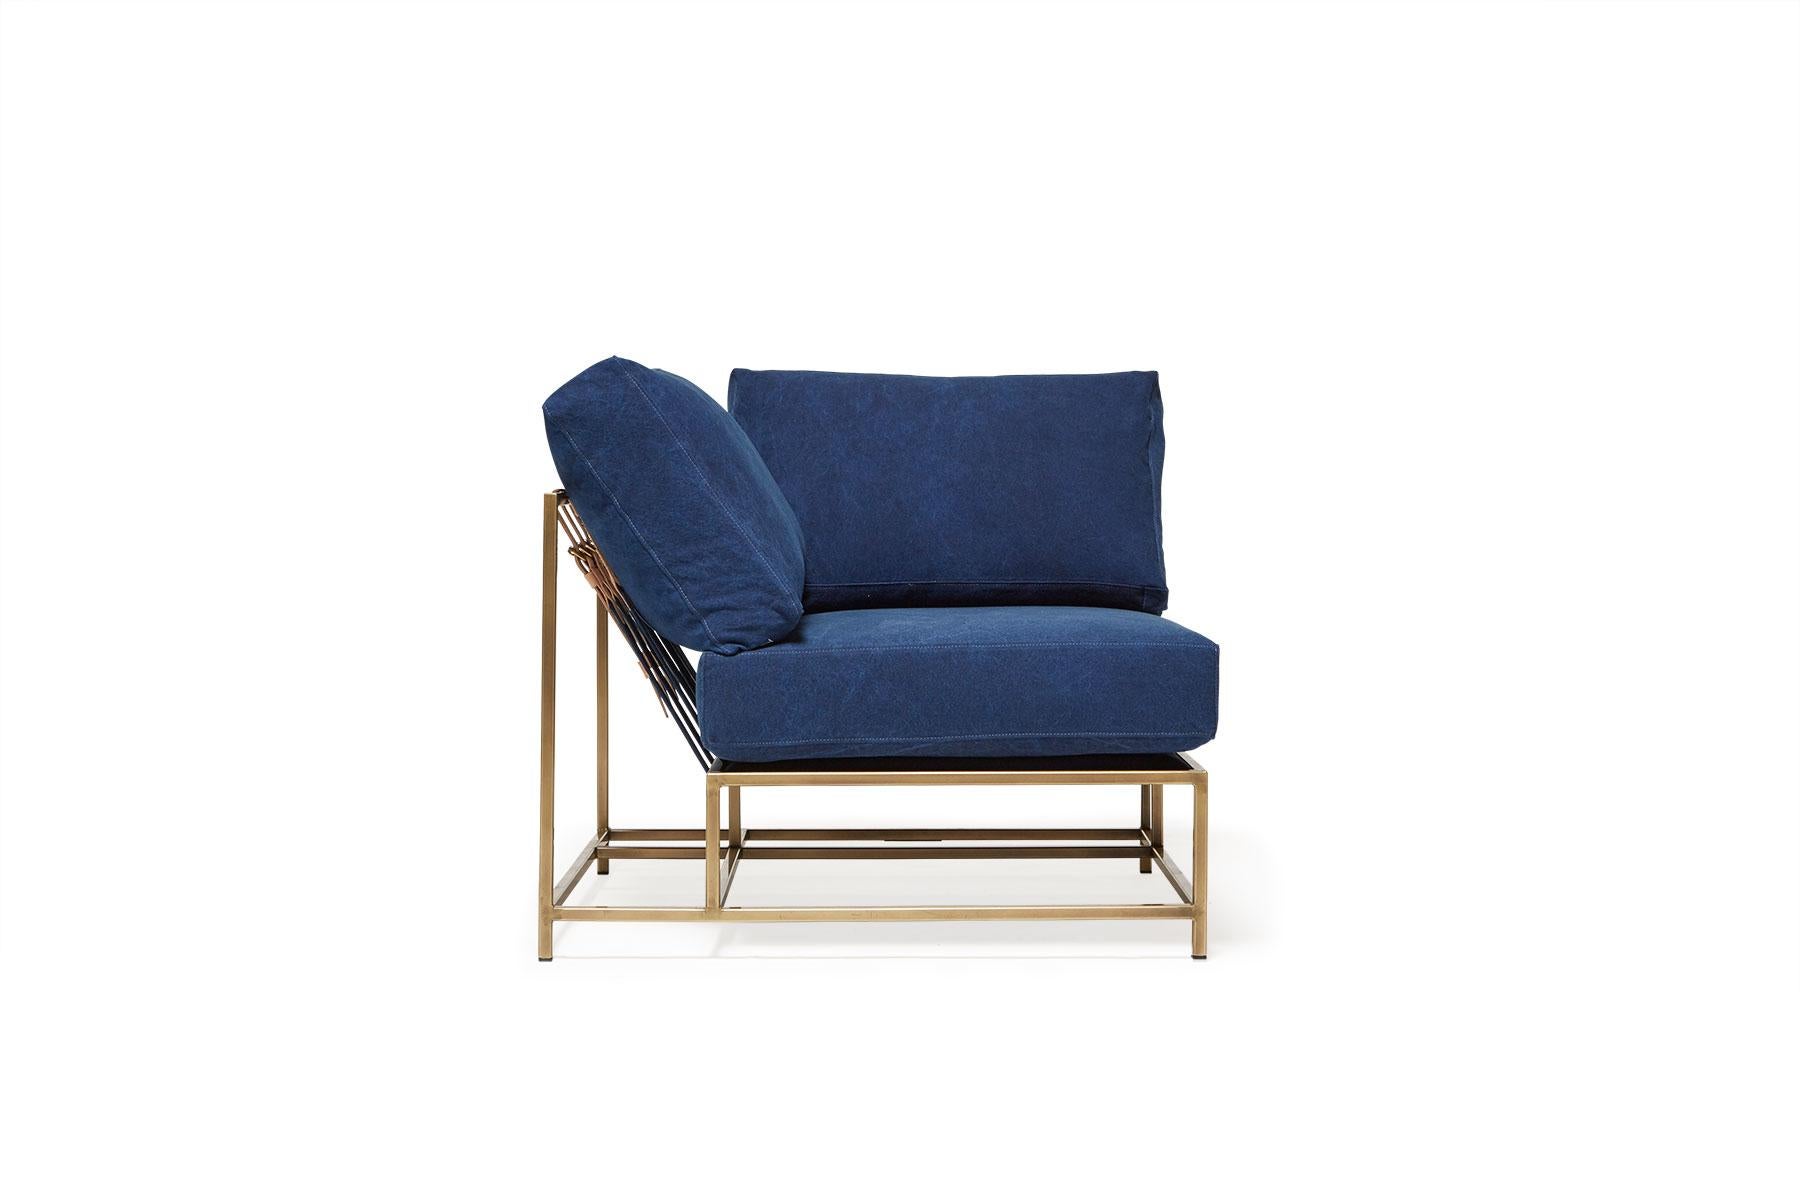 The Inheritance Corner Chair can be used as a standalone piece, or as part of a modular sectional with other Inheritance pieces.

Inspired by a worn-in pair of jeans and created alongside the team at Simon Miller, USA, our indigo cotton canvas is